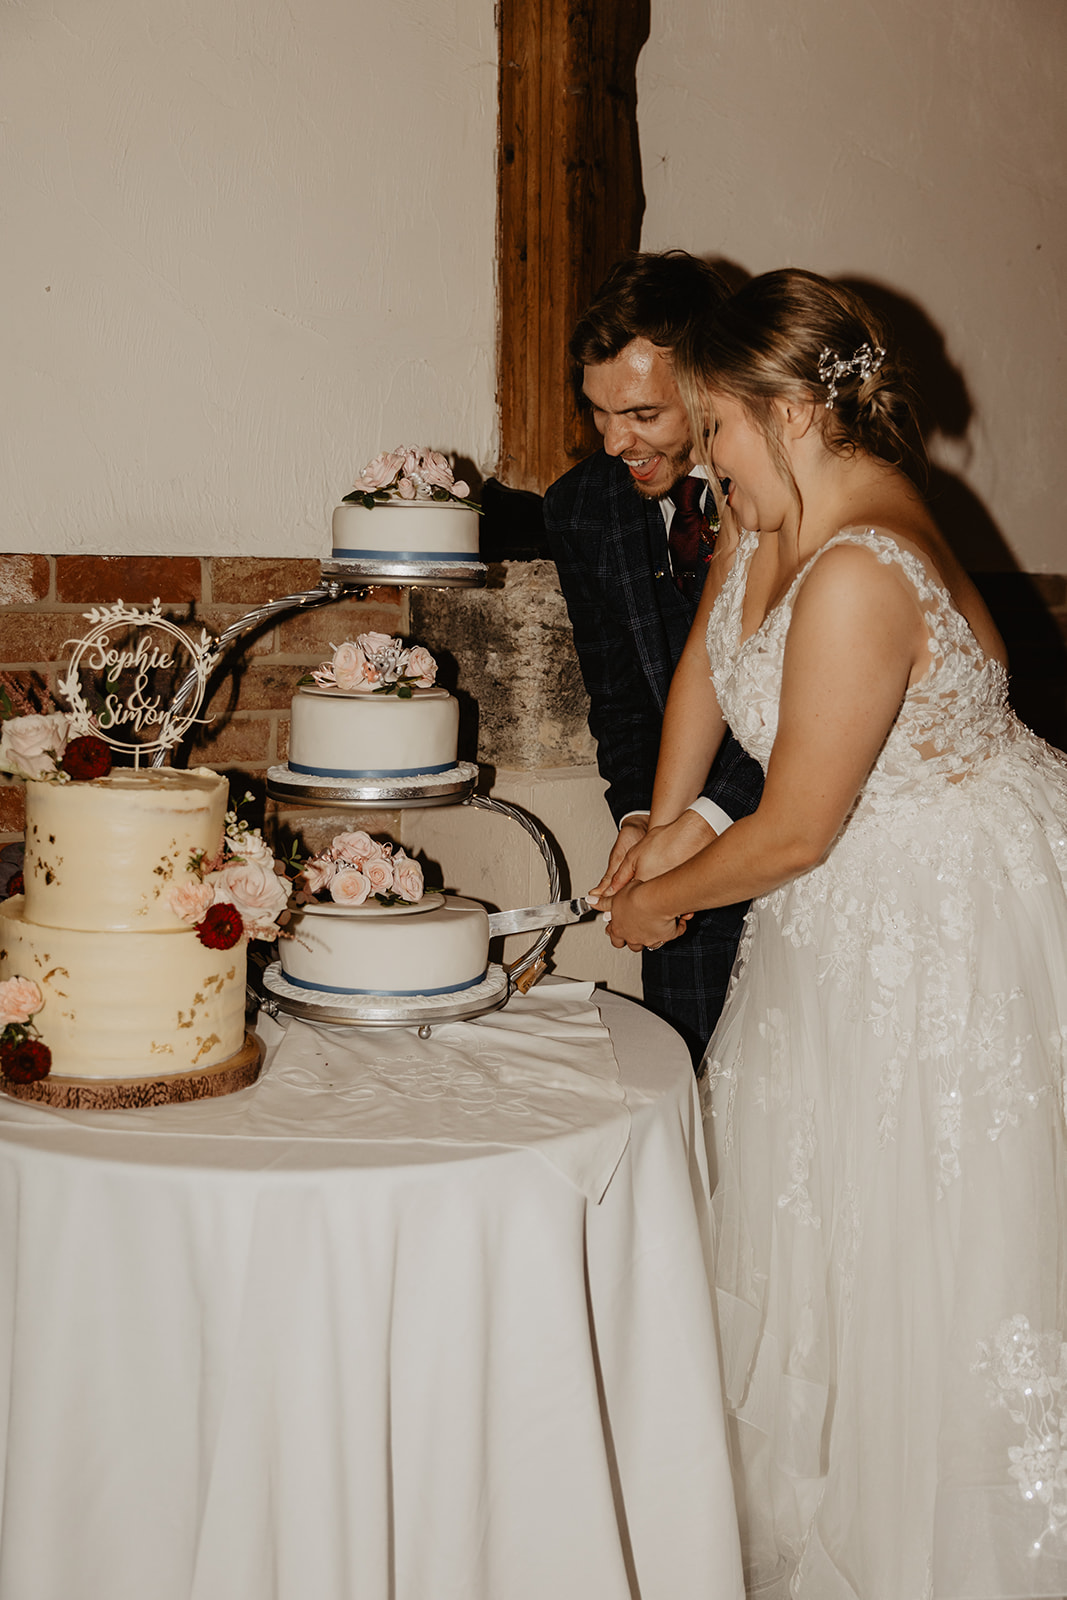 Bride and groom cutting their wedding cake at a wedding at Long Furlong Barn, Sussex. By OliveJoy Photography